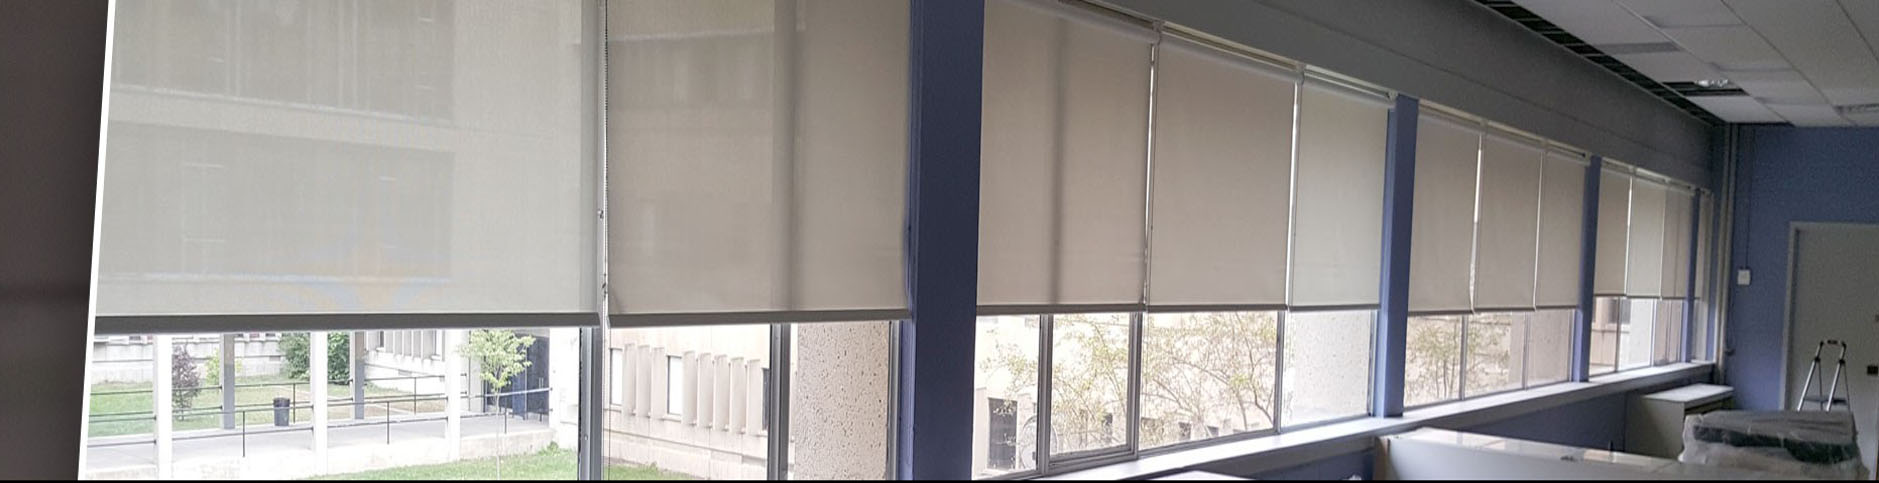 Commercial and Residential Window Coverings in Boston, MA